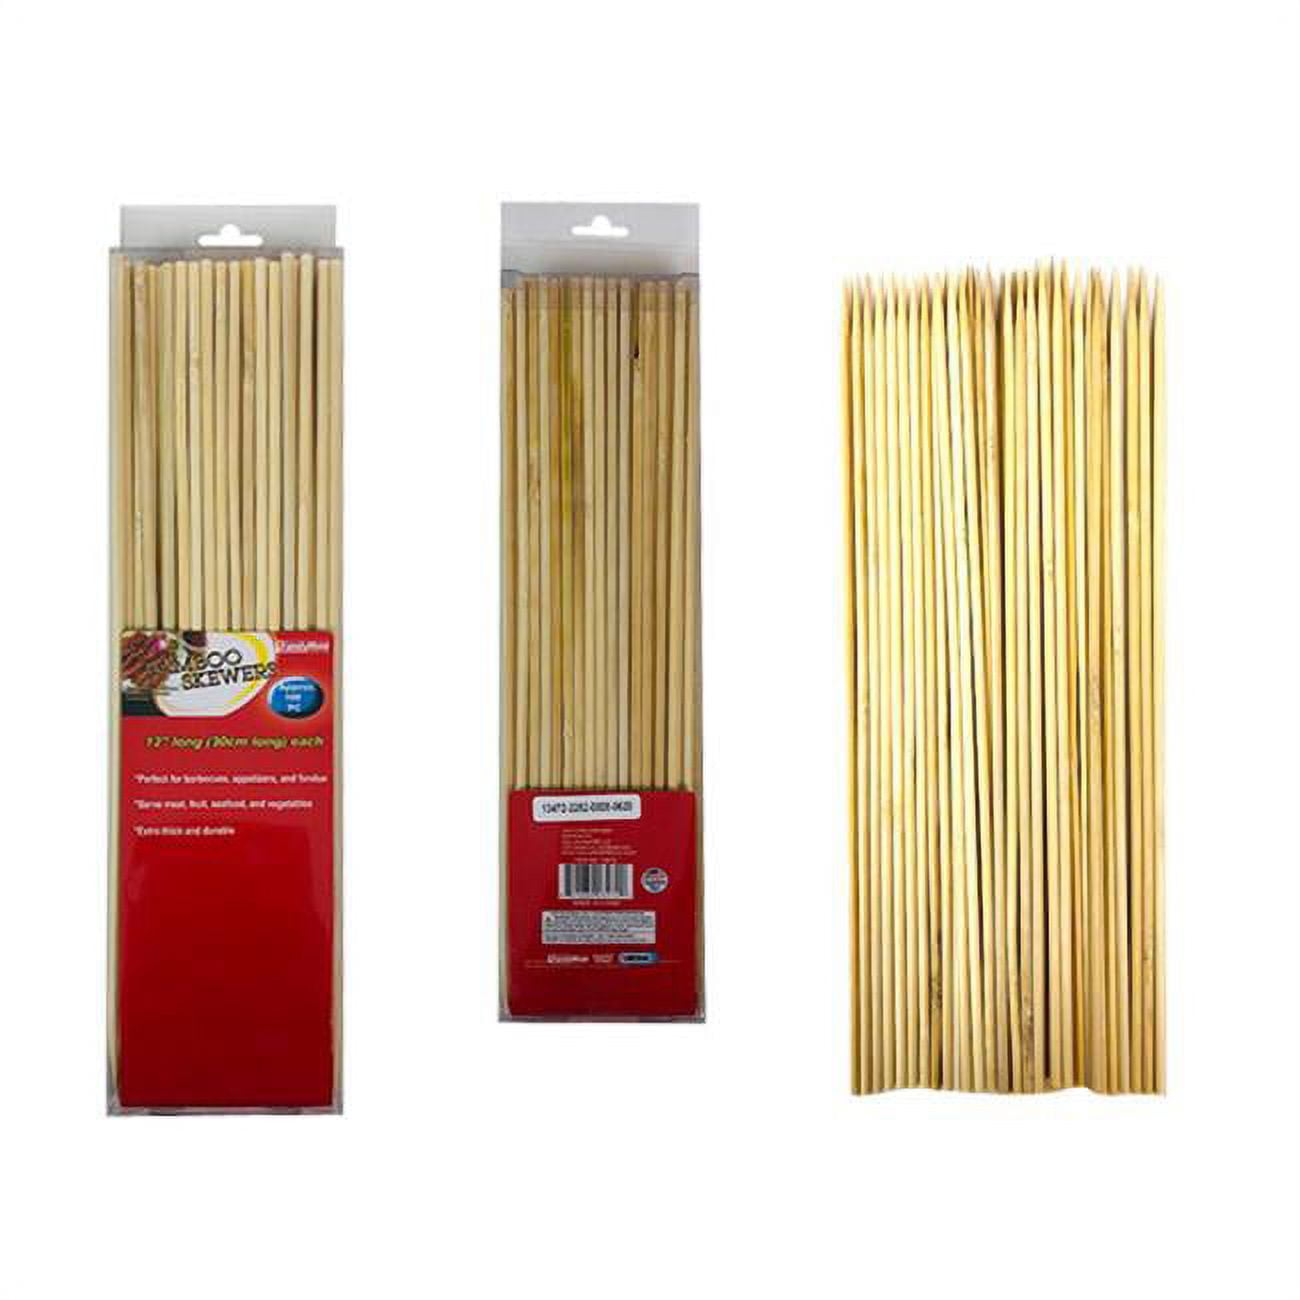 Picture of FamilyMaid 13472 30 cm x 4 in. Bamboo Skewers - 100 Piece